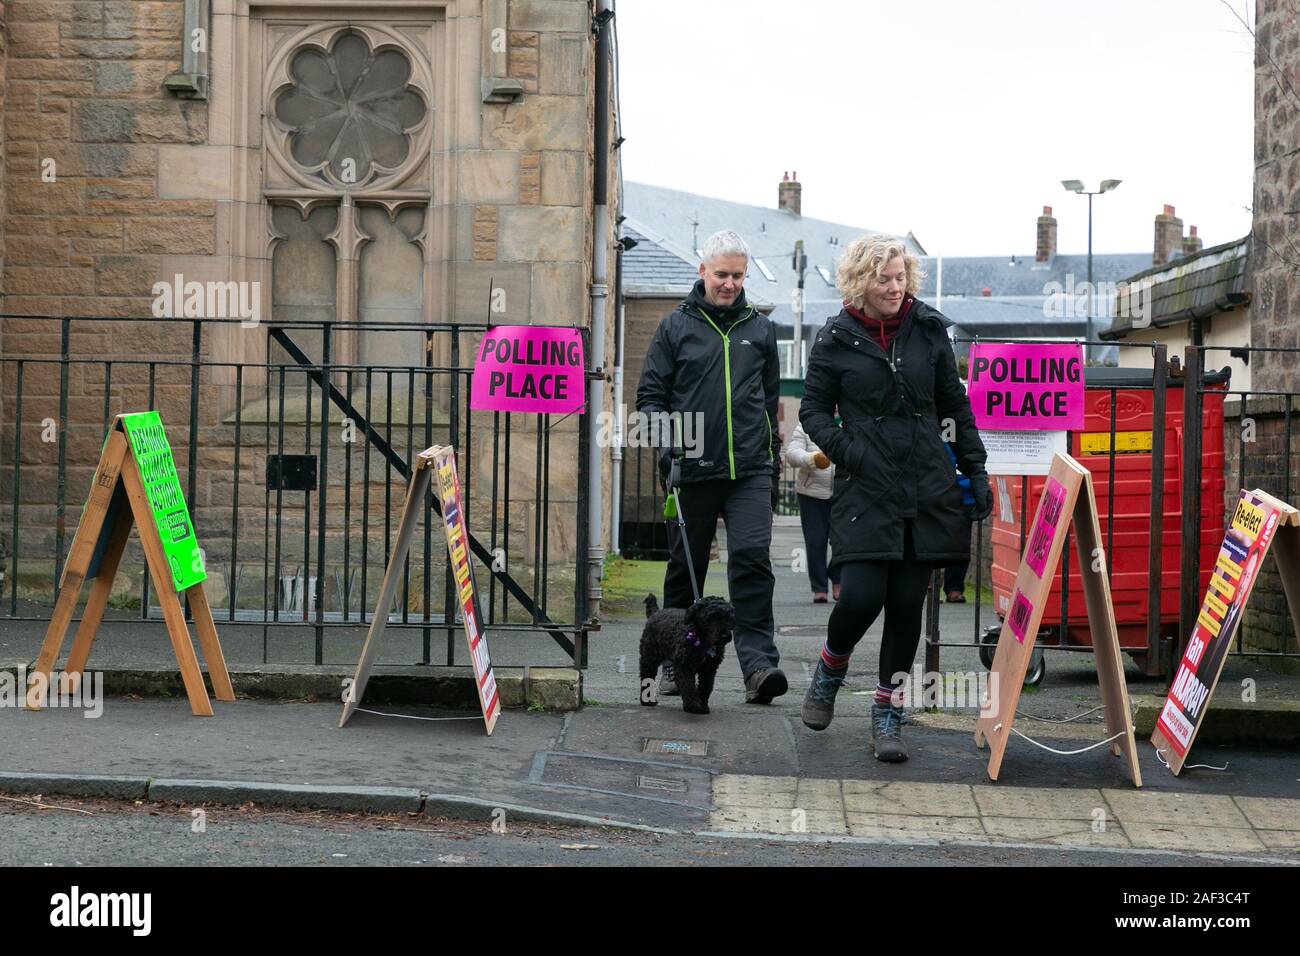 Edinburgh, Scotland, 12th December 2019. A middle-aged couple with a dog exit the polling station after casting their votes in the UK's winter General Election. Credit: Brian Wilson/Alamy Live News. Stock Photo